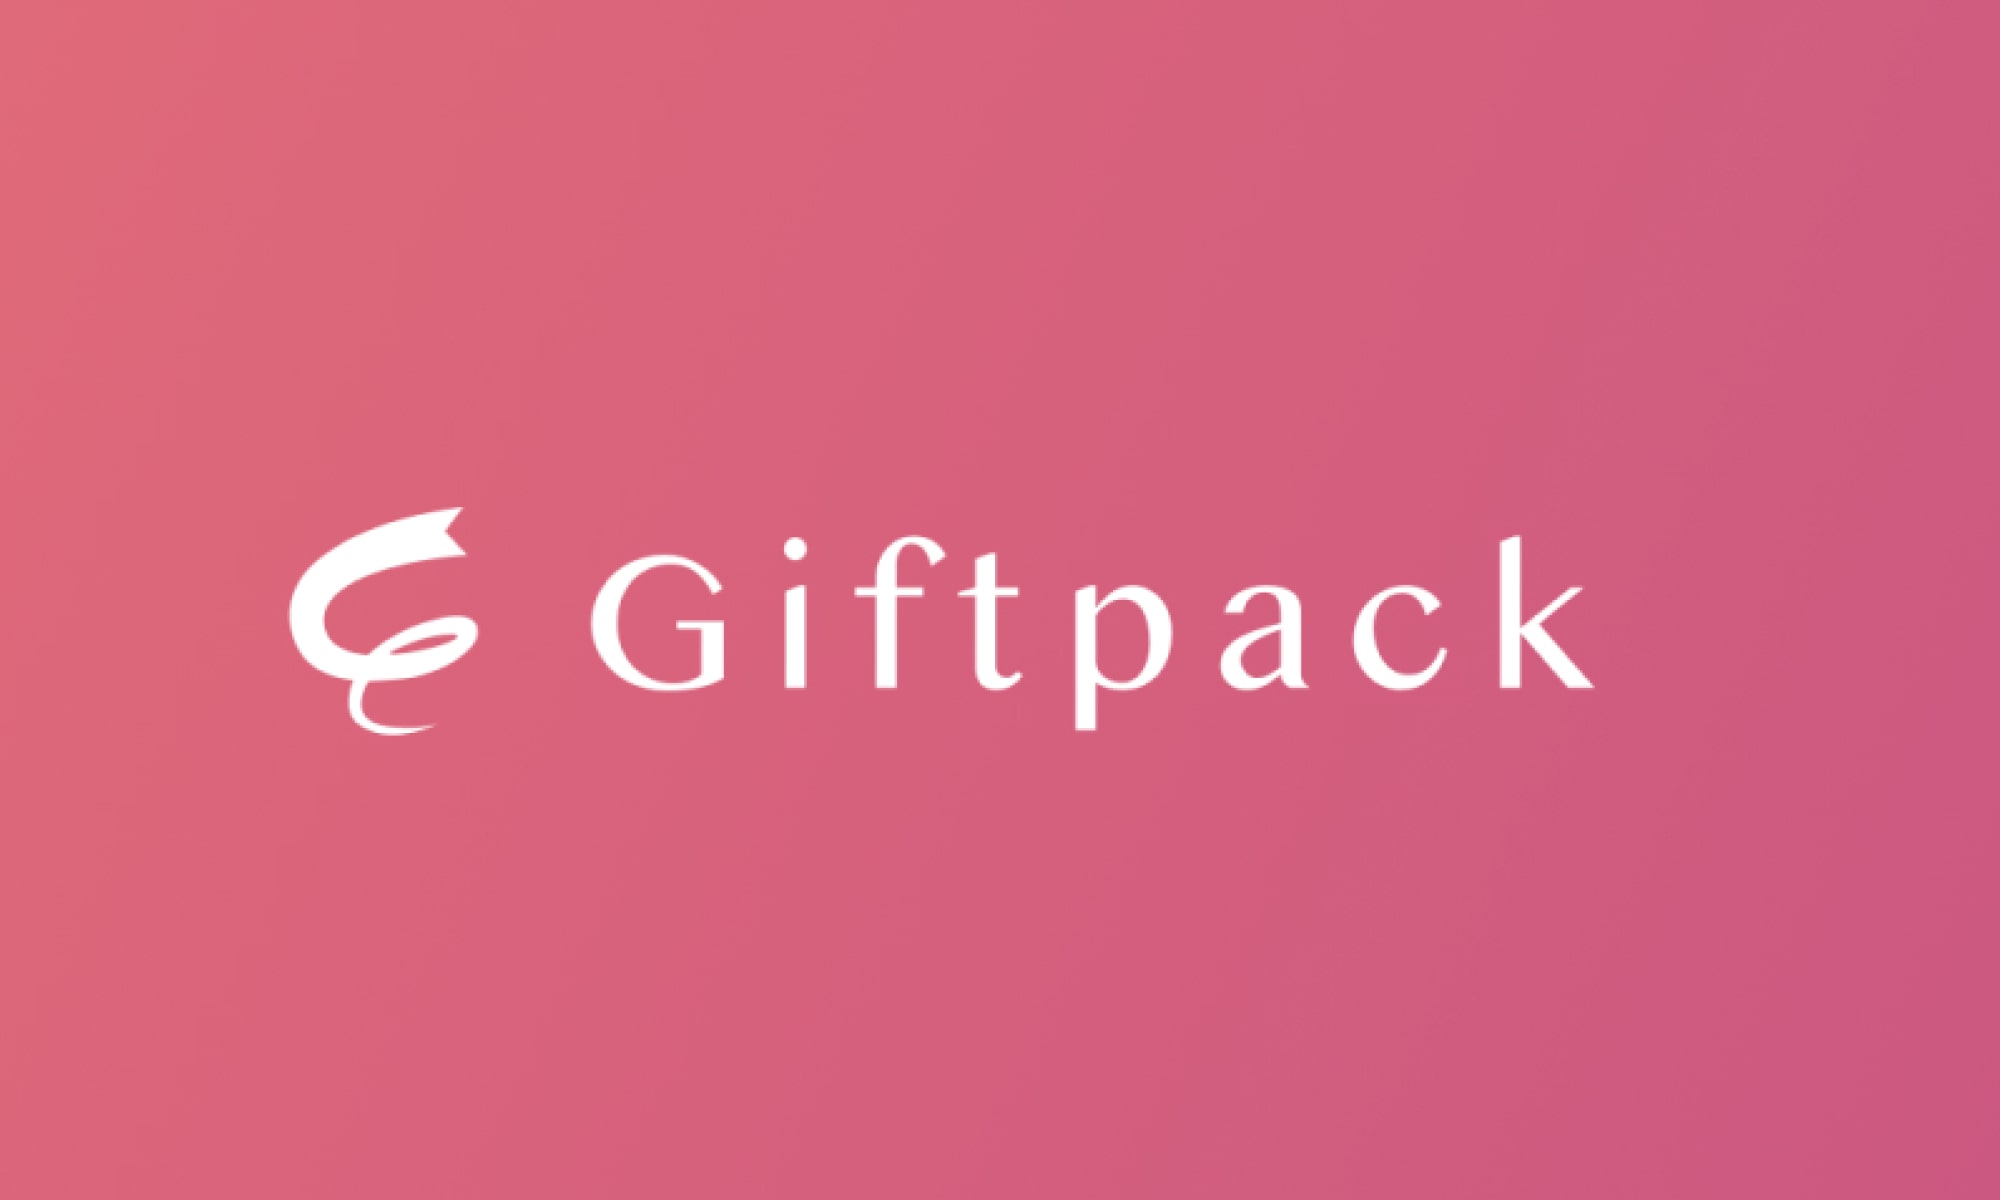 giftpack io logo pink background and white words